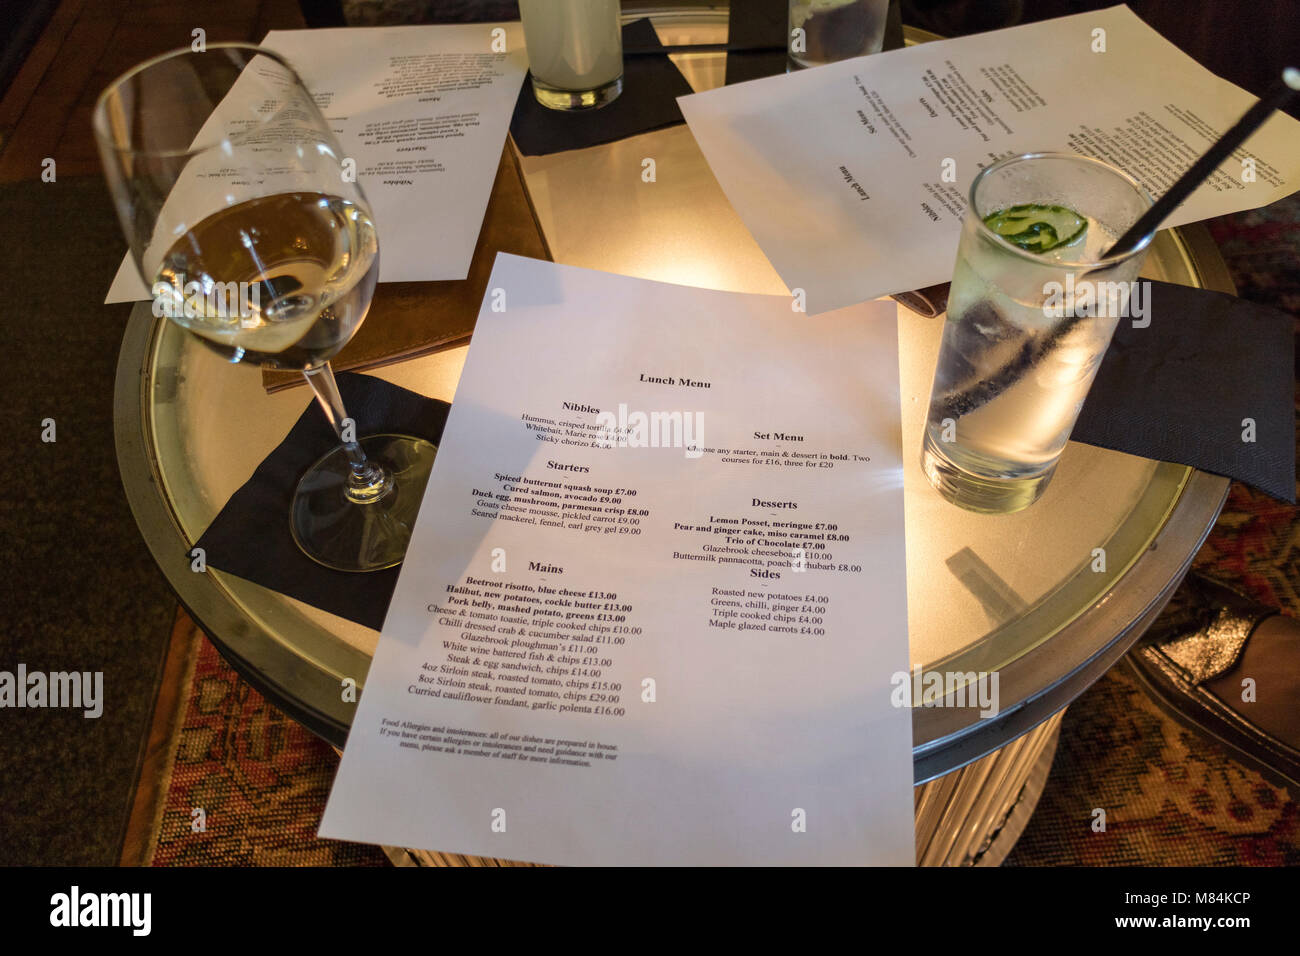 Menu with drinks glasses on an illuminated table Stock Photo